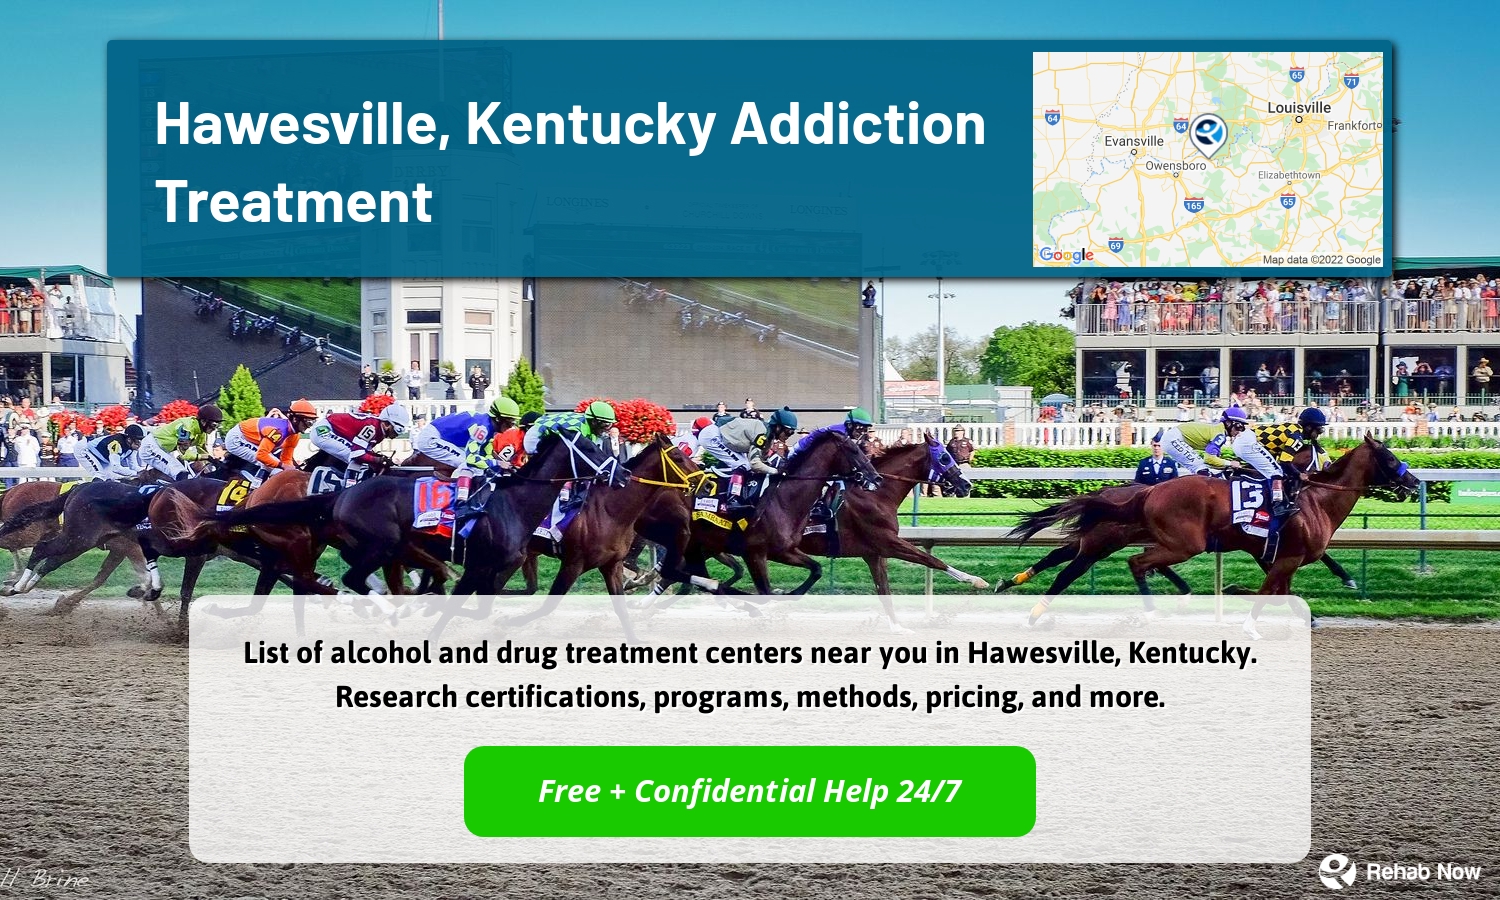 List of alcohol and drug treatment centers near you in Hawesville, Kentucky. Research certifications, programs, methods, pricing, and more.